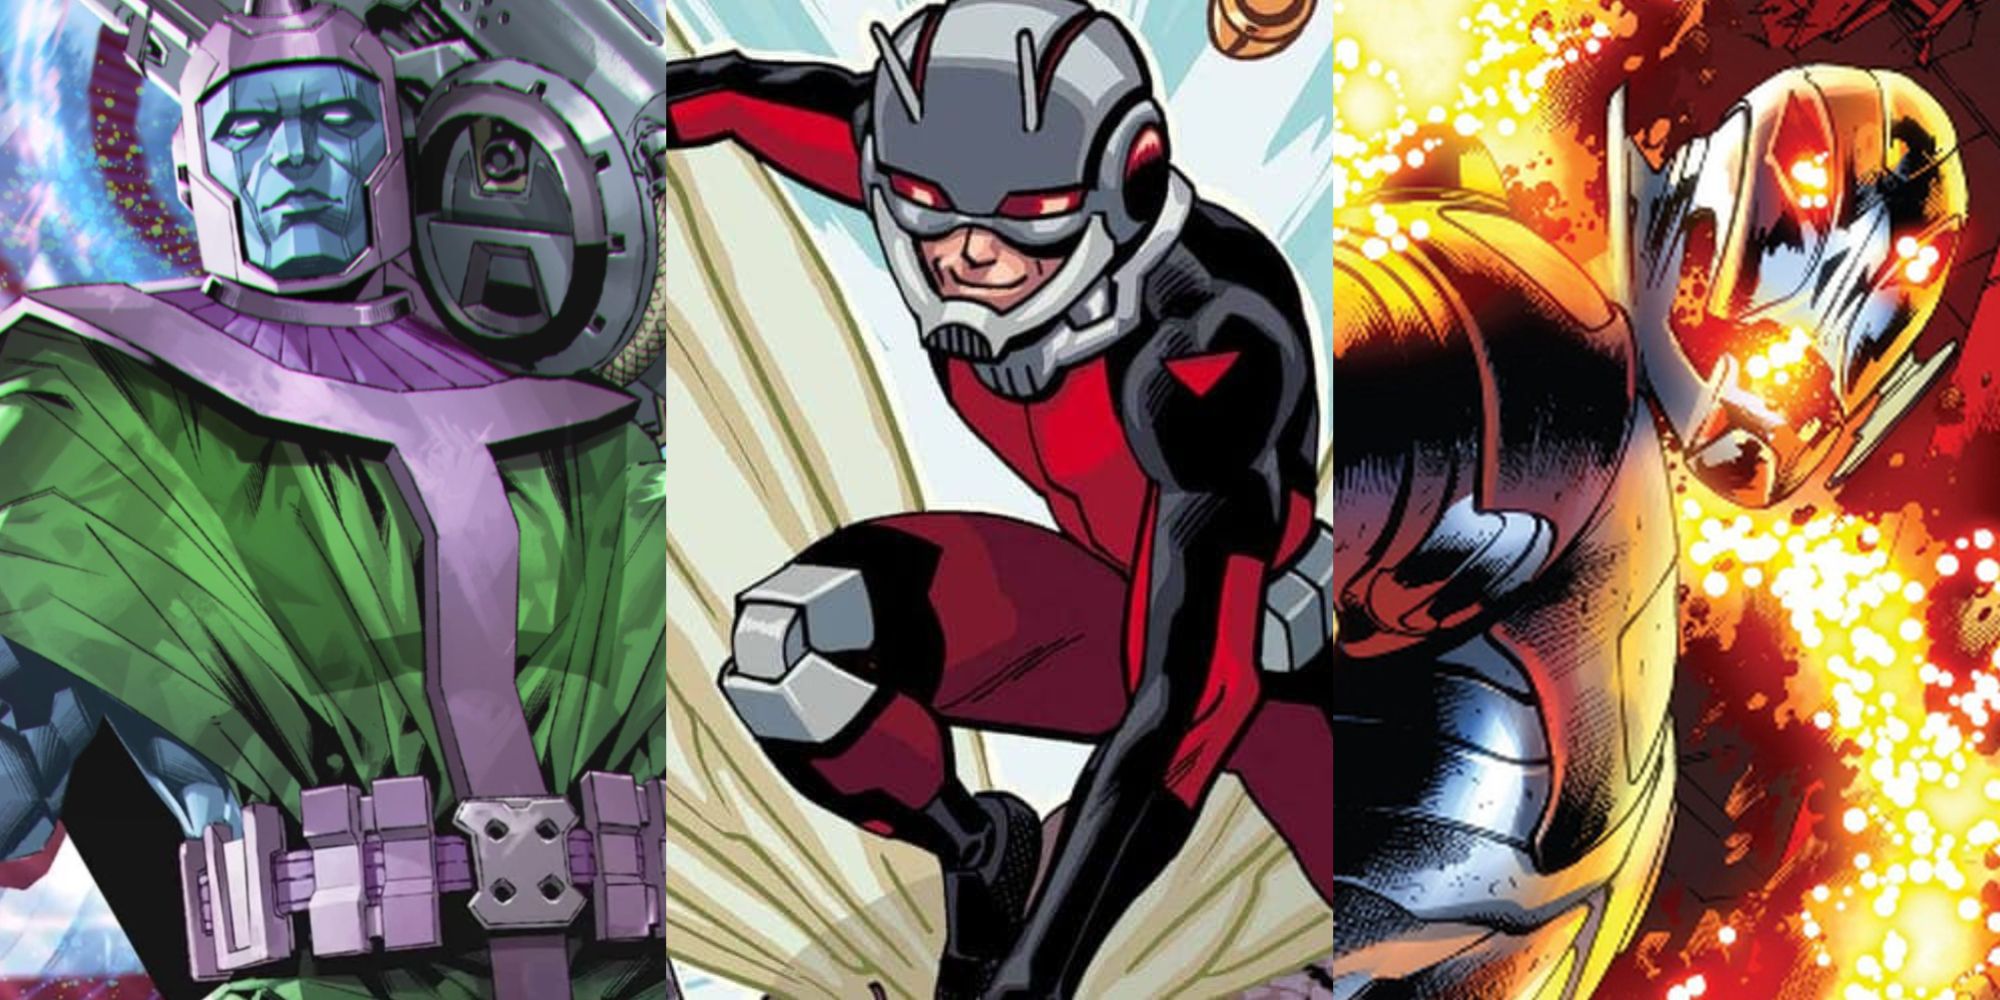 Split image of Kang The Conqueror, Ant-Man, and Ultron from Marvel Comics.